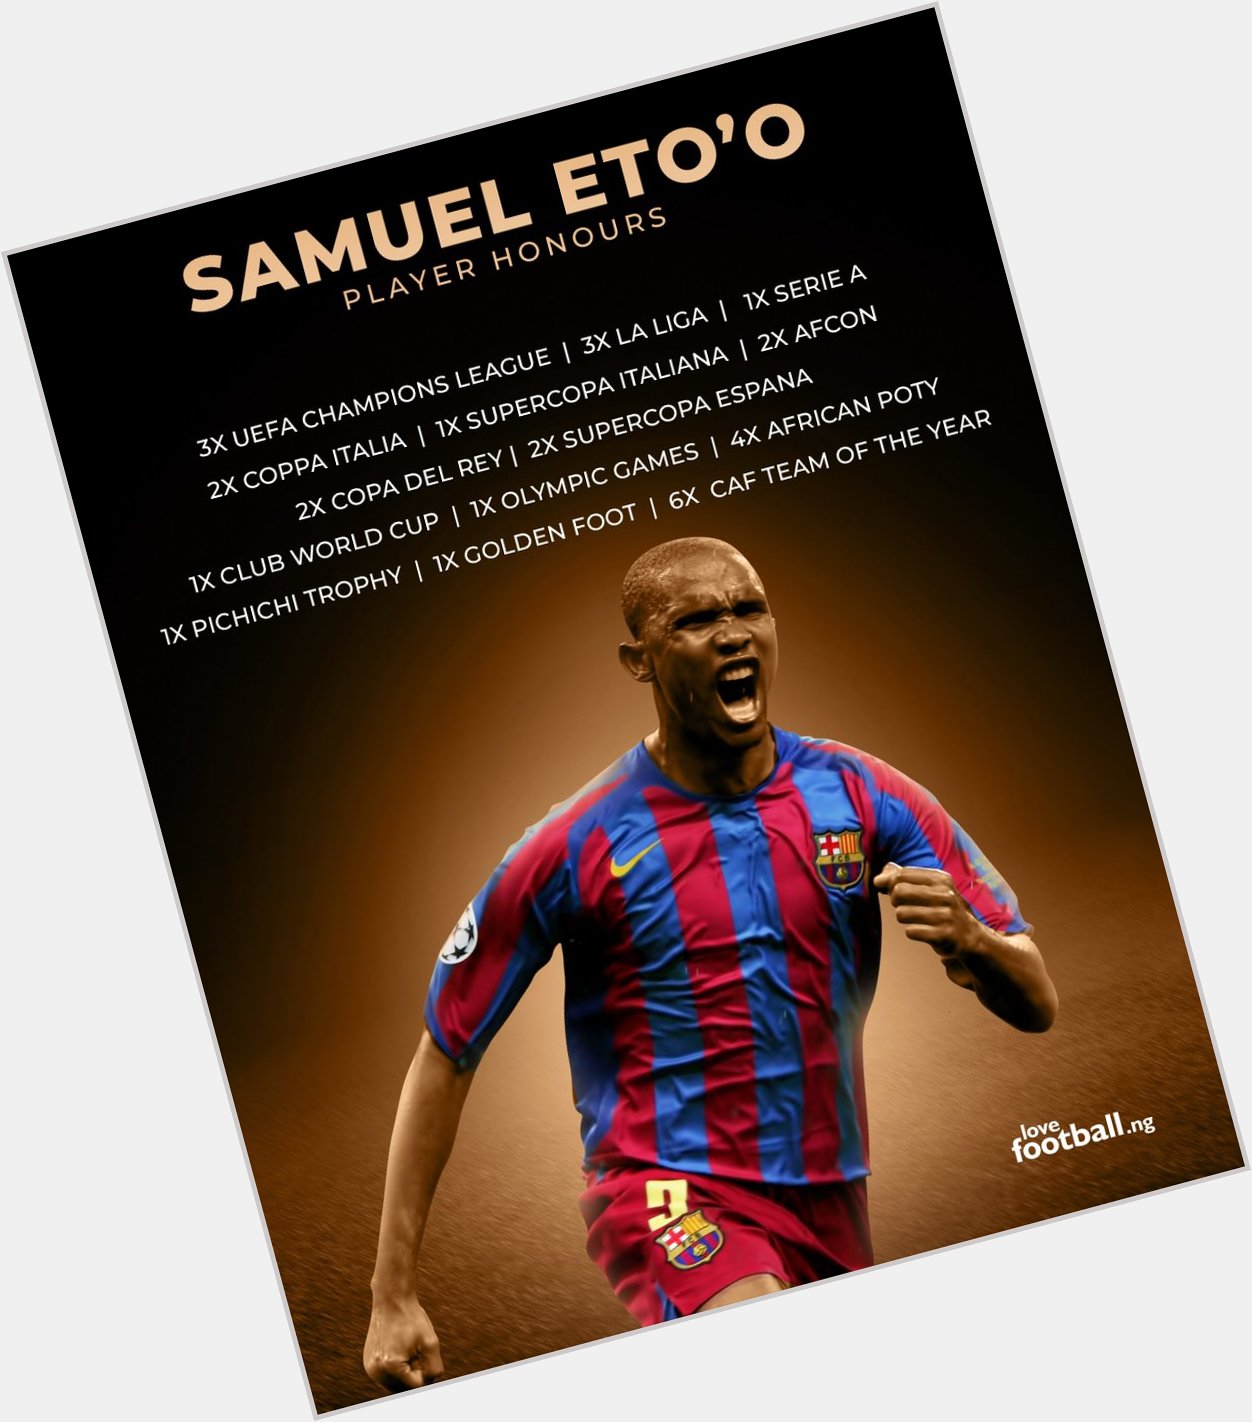 Happy 40th birthday to Samuel Eto\o.
A proper legend of the game!

What\s your favourite goal by Samuel Eto\o? 